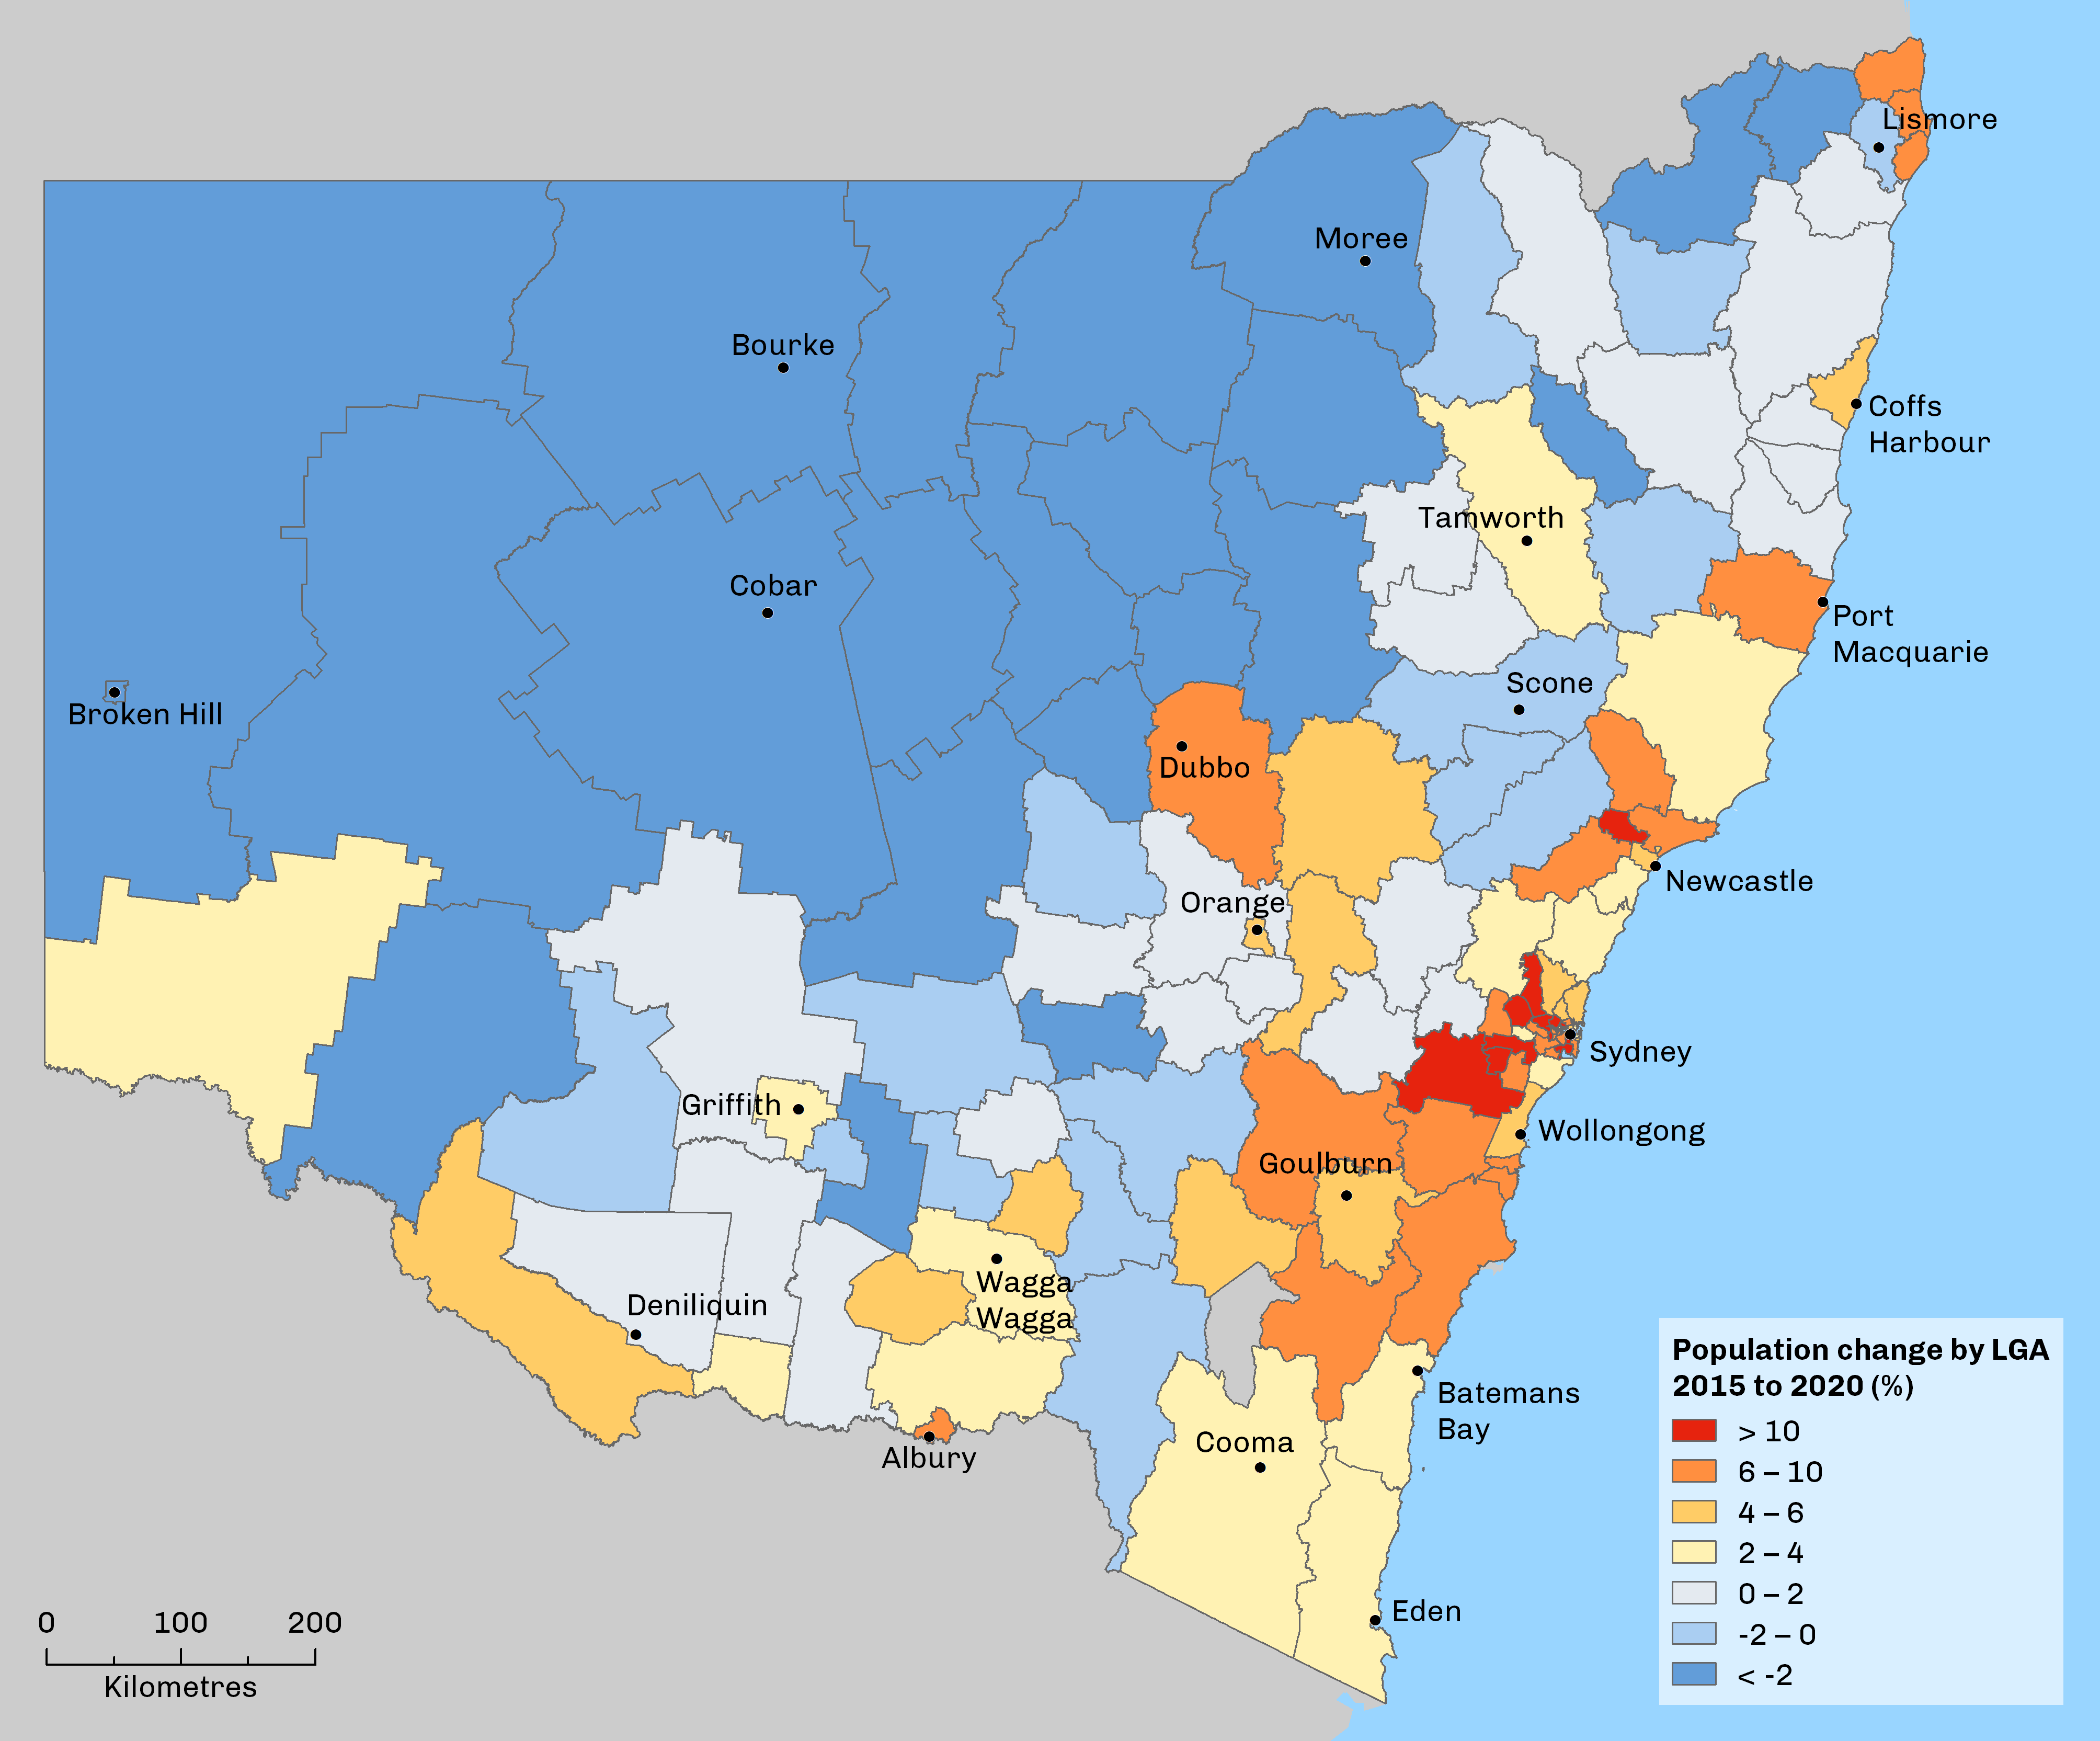 Map of NSW showing population change, with most growth occurring in north west and south west Sydney regions, and least change occurring in north west and western NSW